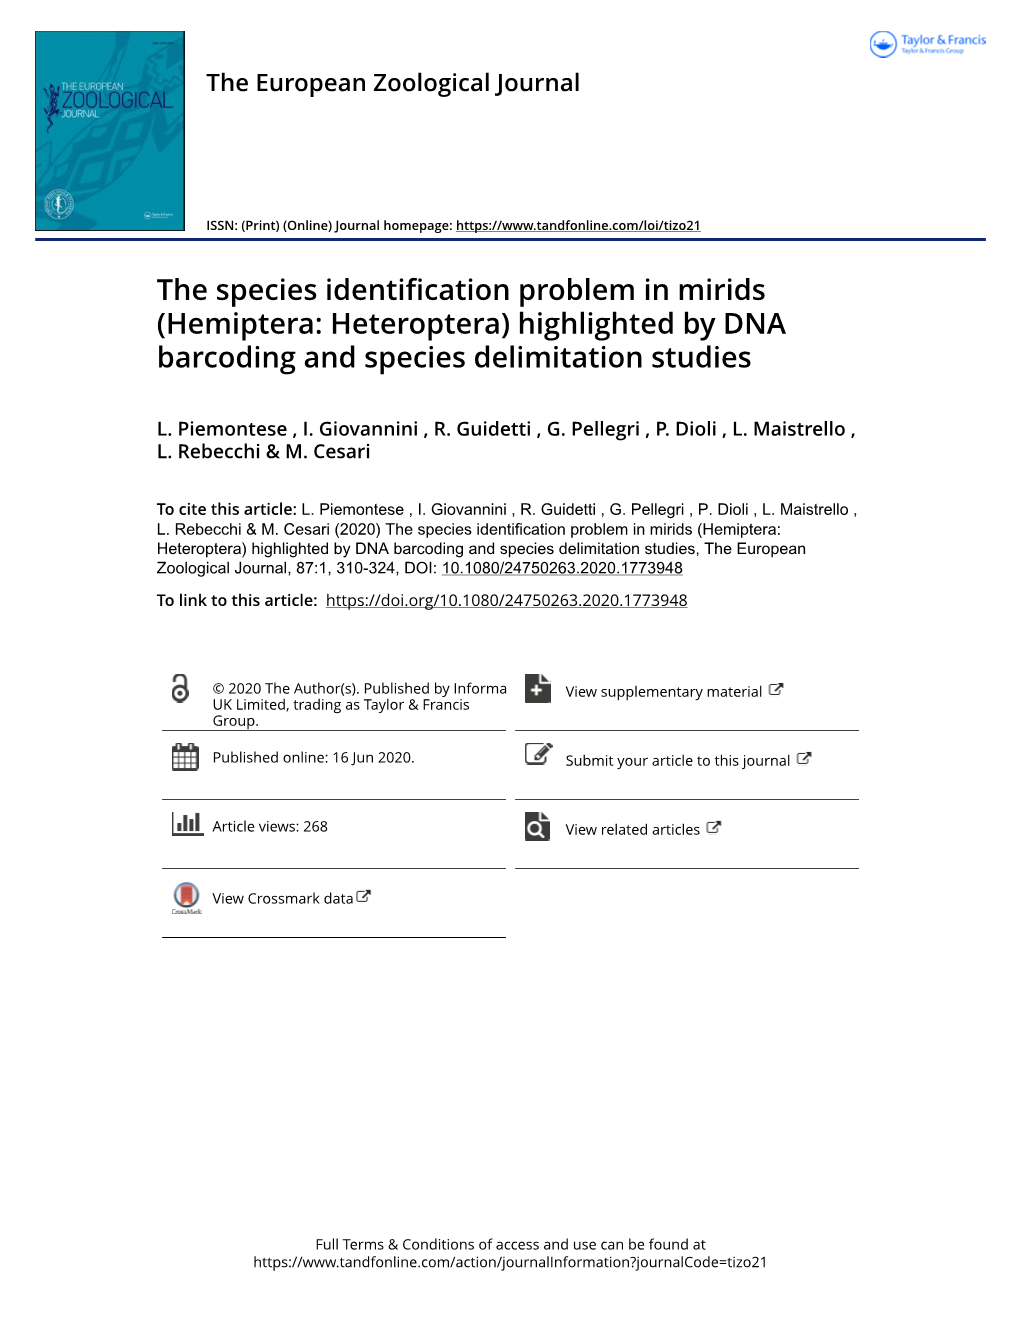 The Species Identification Problem in Mirids (Hemiptera: Heteroptera) Highlighted by DNA Barcoding and Species Delimitation Studies